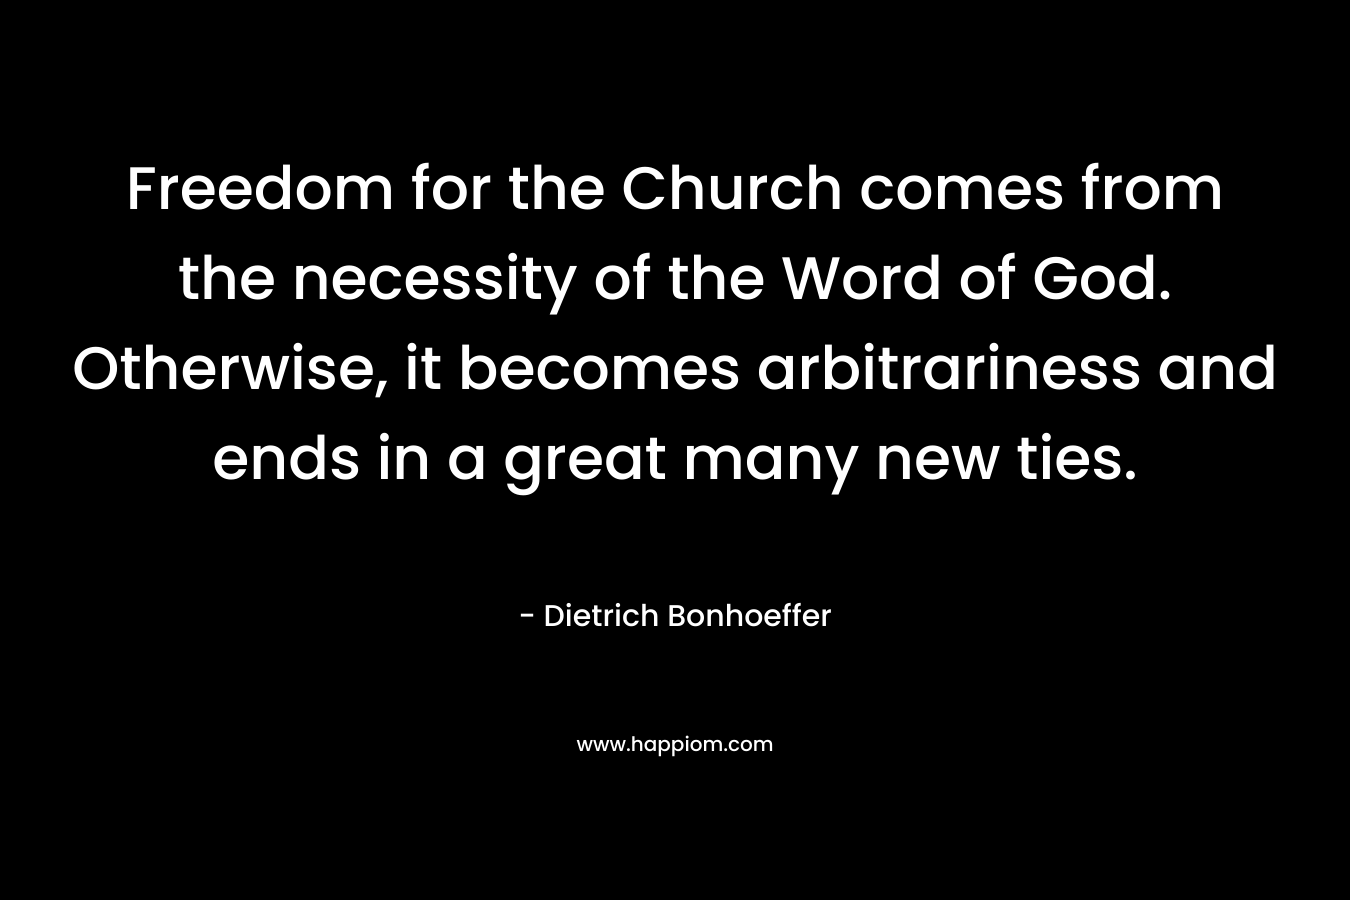 Freedom for the Church comes from the necessity of the Word of God. Otherwise, it becomes arbitrariness and ends in a great many new ties.